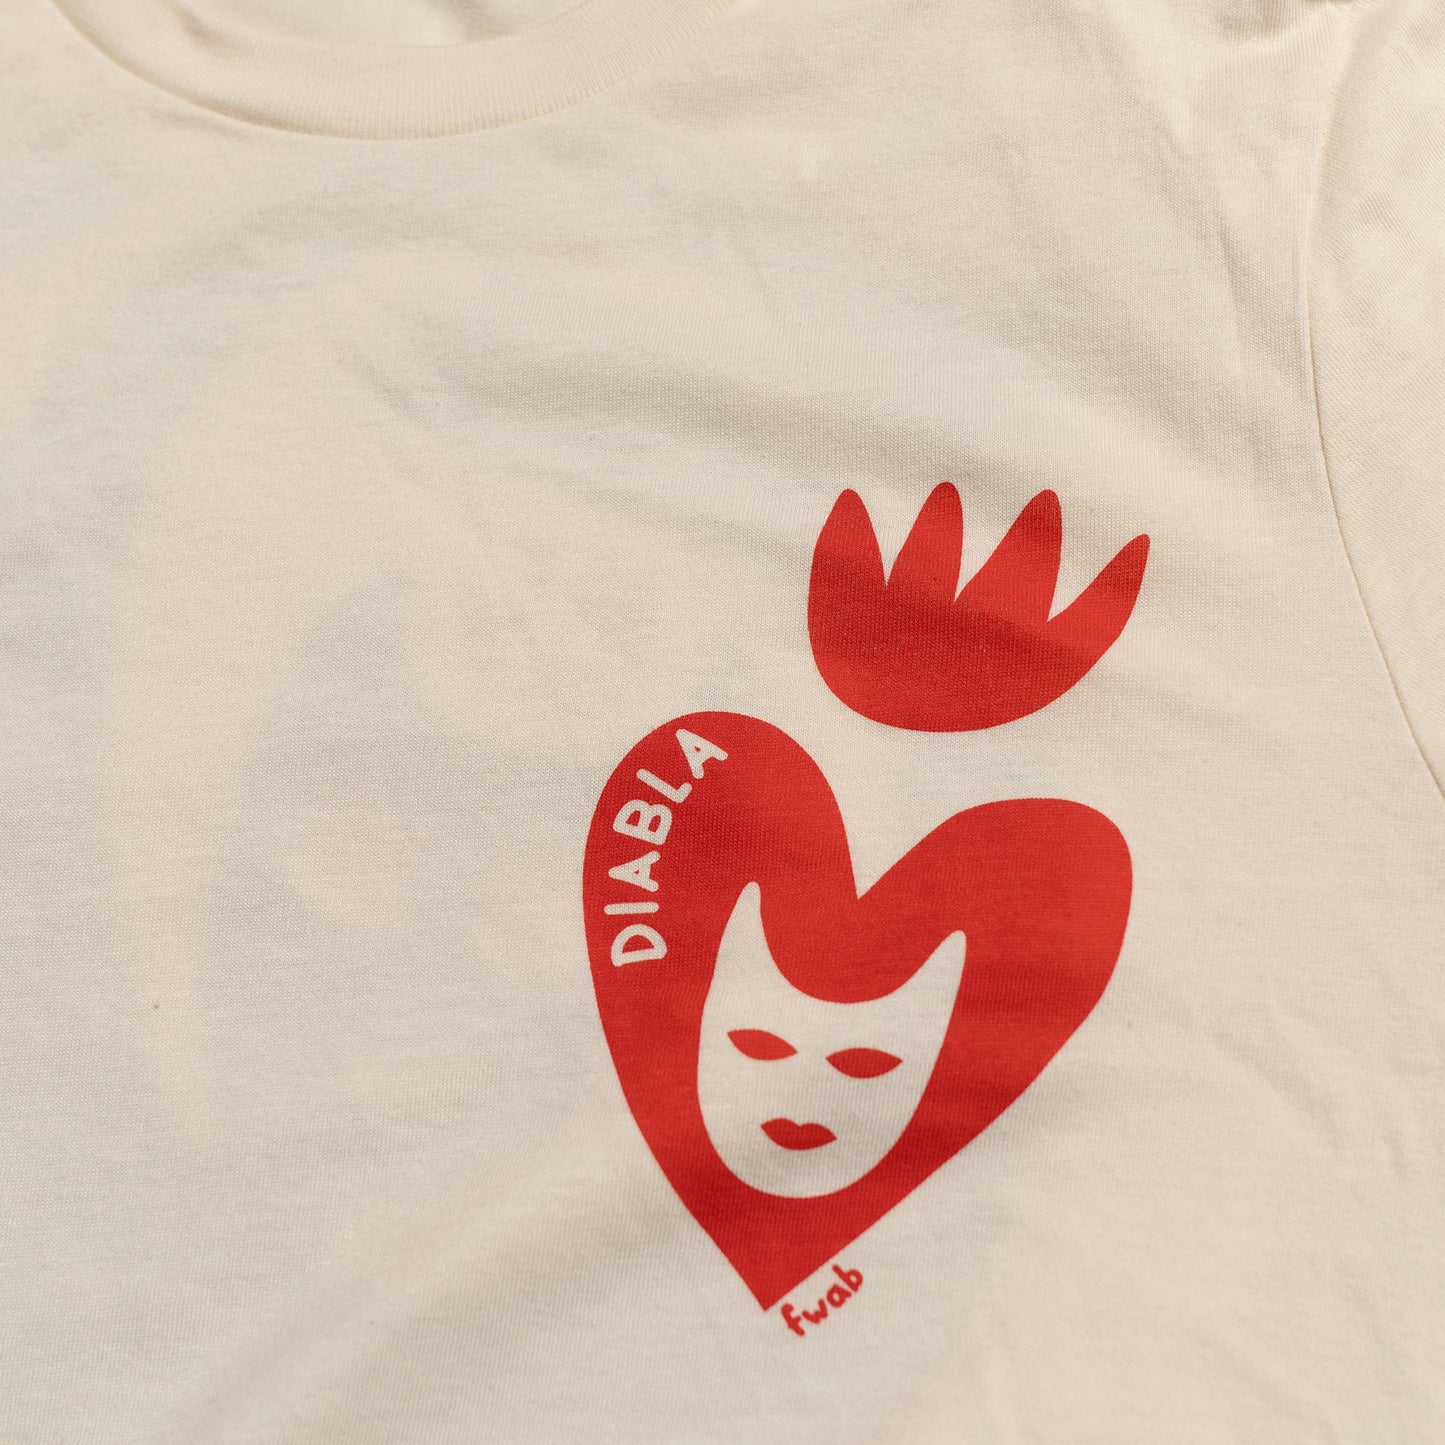 Closeup detail of print graphic on front side of shirt. heart with fire crown and inside devil face and the word "diabla"